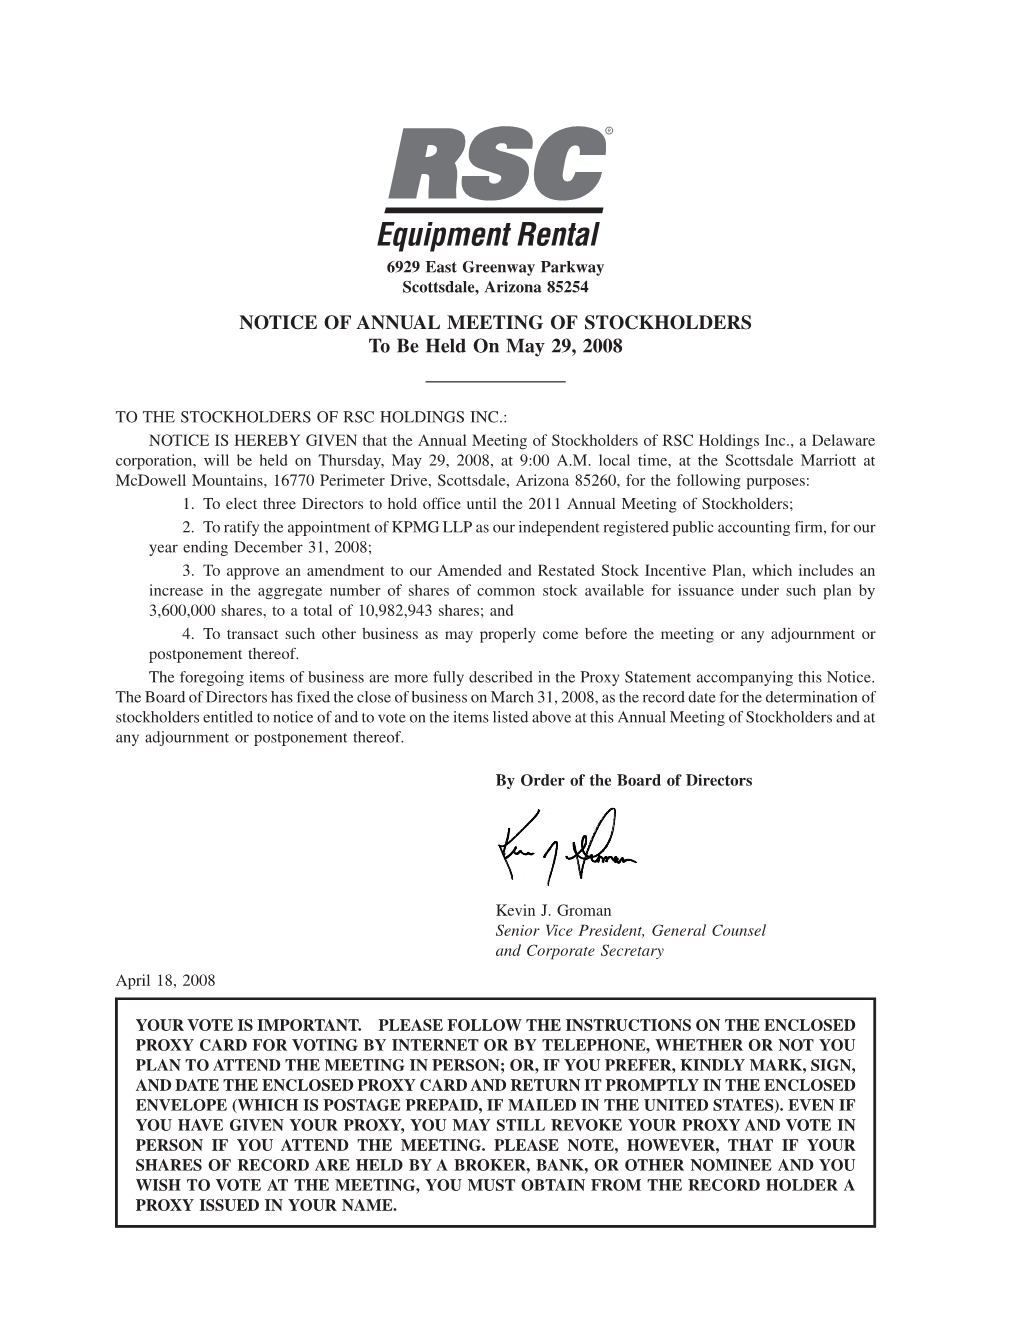 NOTICE of ANNUAL MEETING of STOCKHOLDERS to Be Held on May 29, 2008